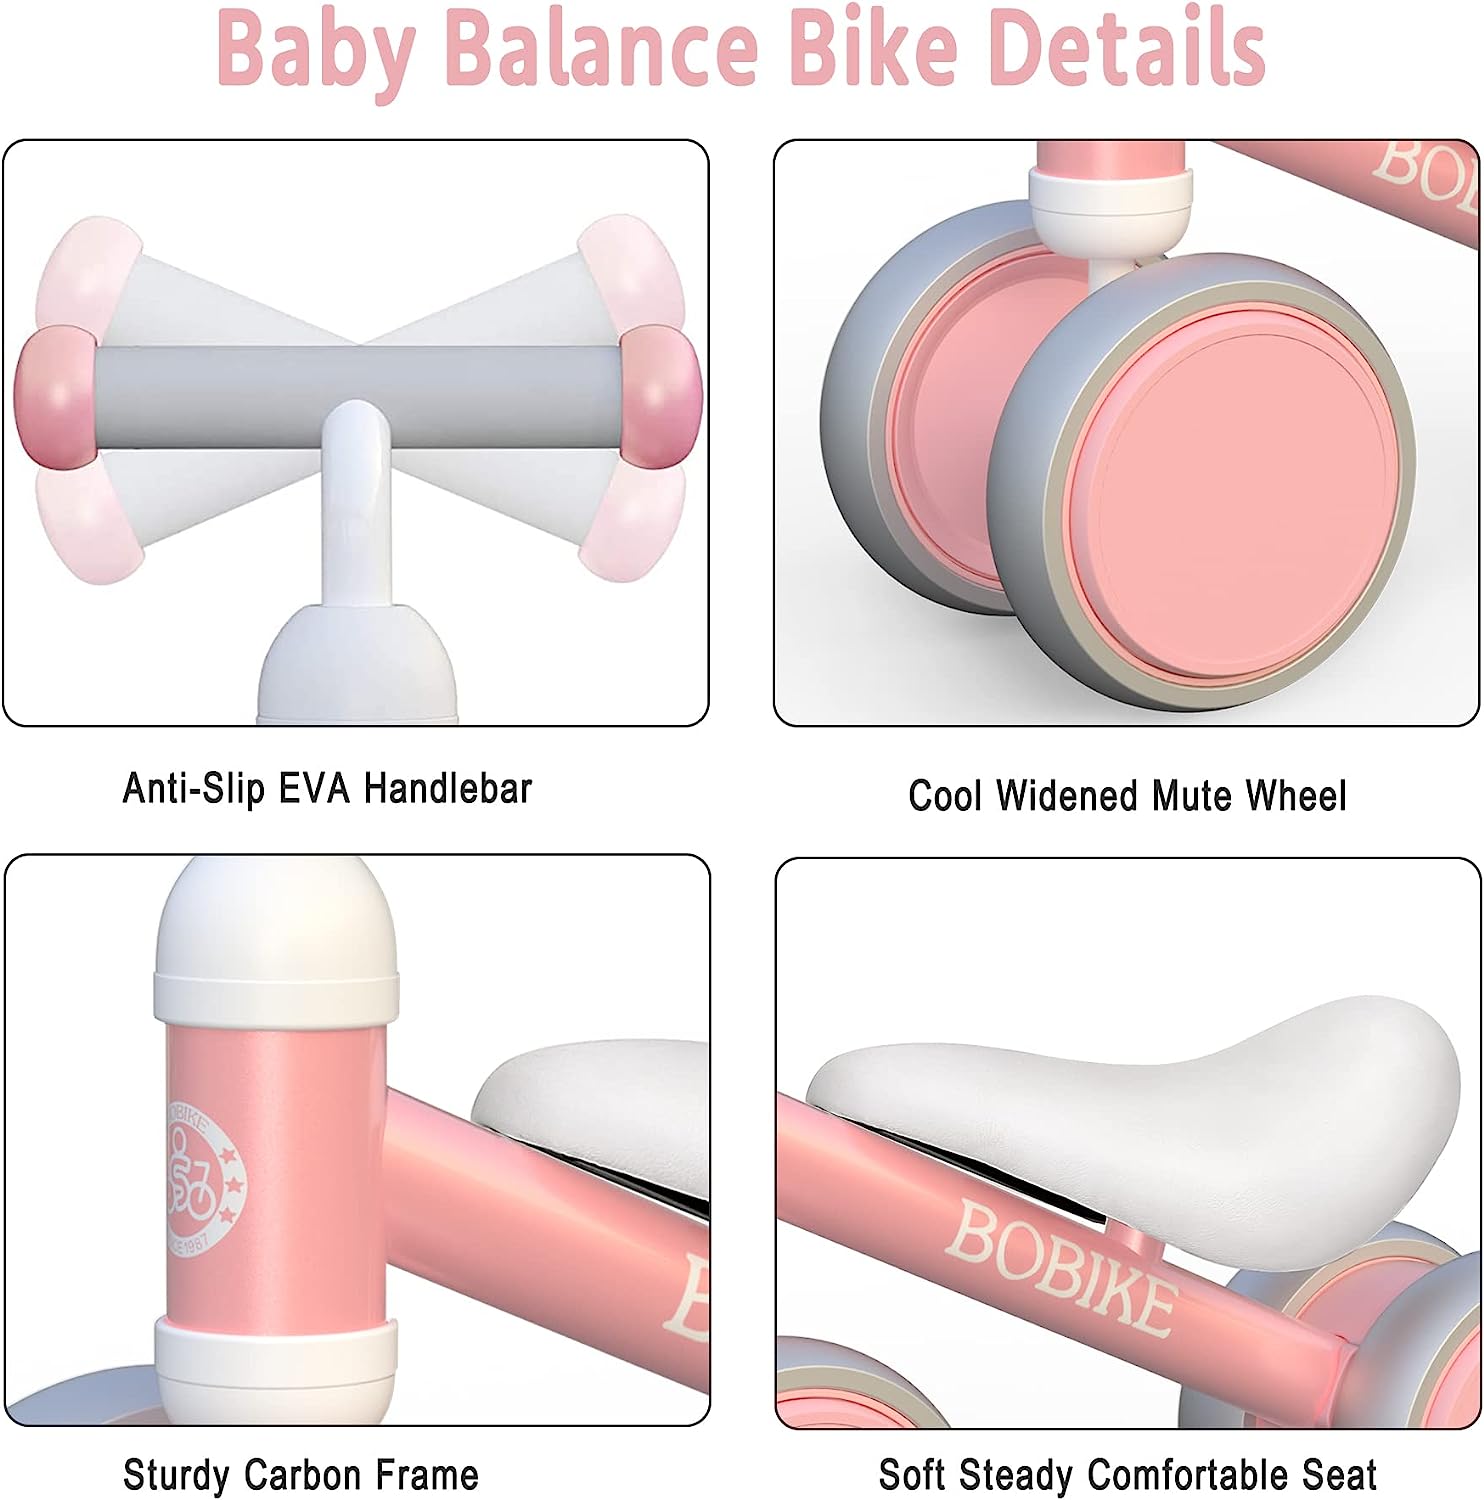 Baby Balance Bike Toys for 1 Year Old Gifts Boys Girls 10-24 Months Kids Toys Toddler Best First Birthday Gifts Children Walker Baby Walker No Pedal Infant 4 Wheels Bicycle (Pink)